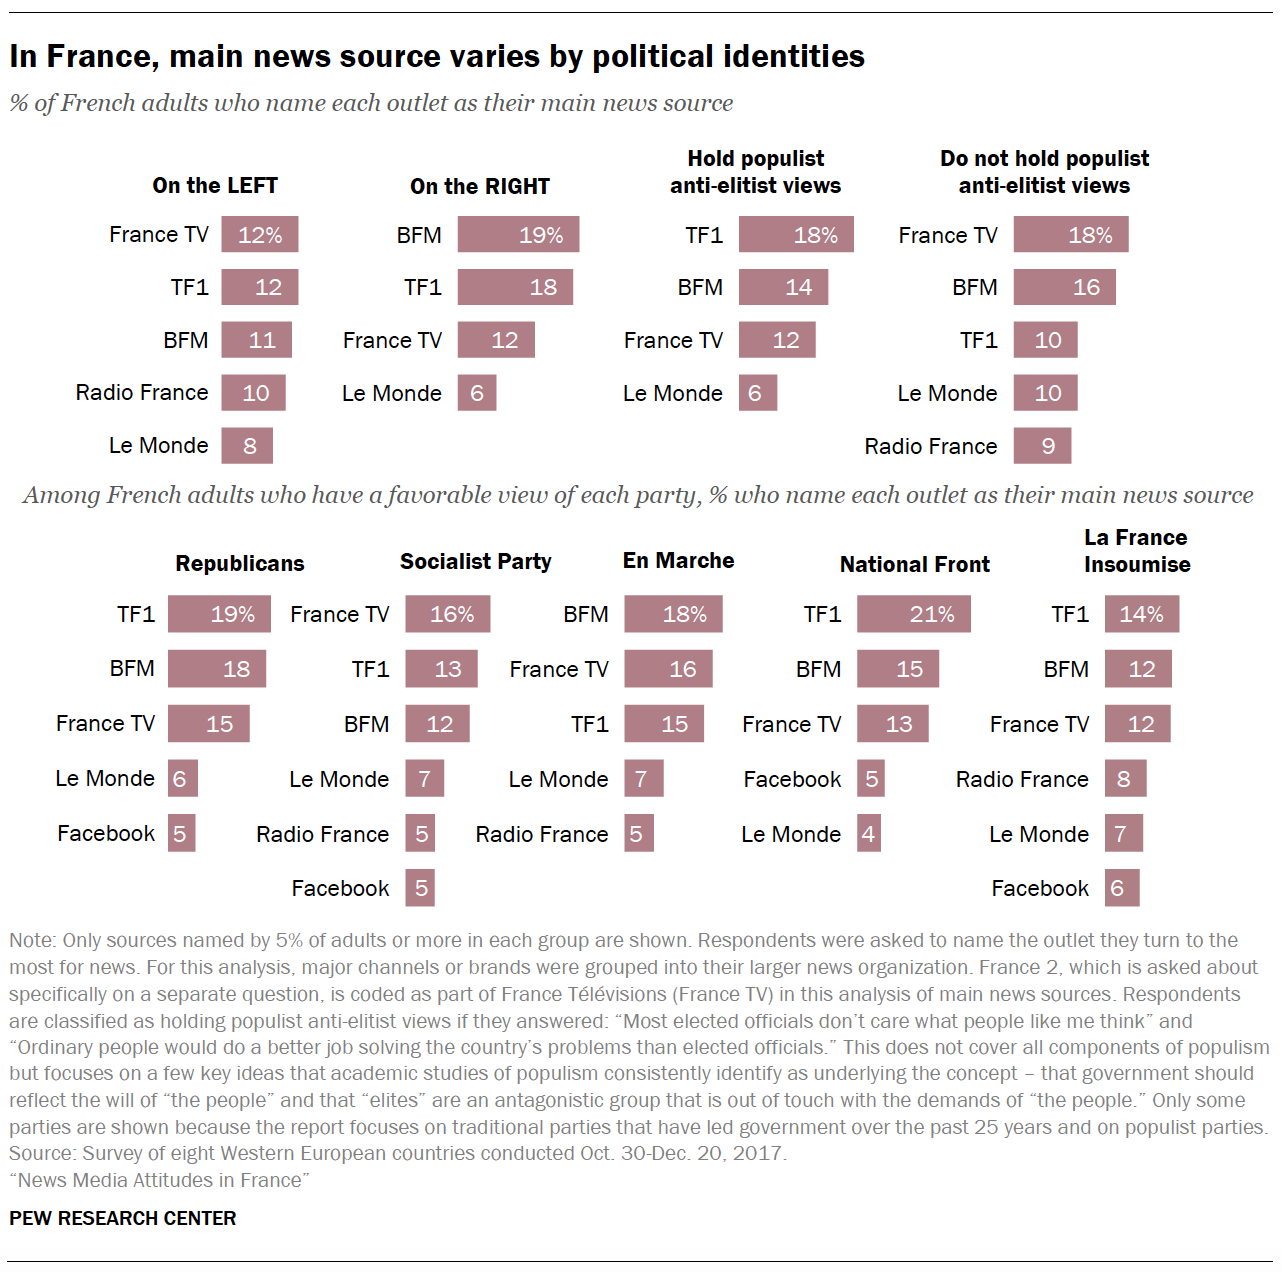 In France, main news source varies by political identities 